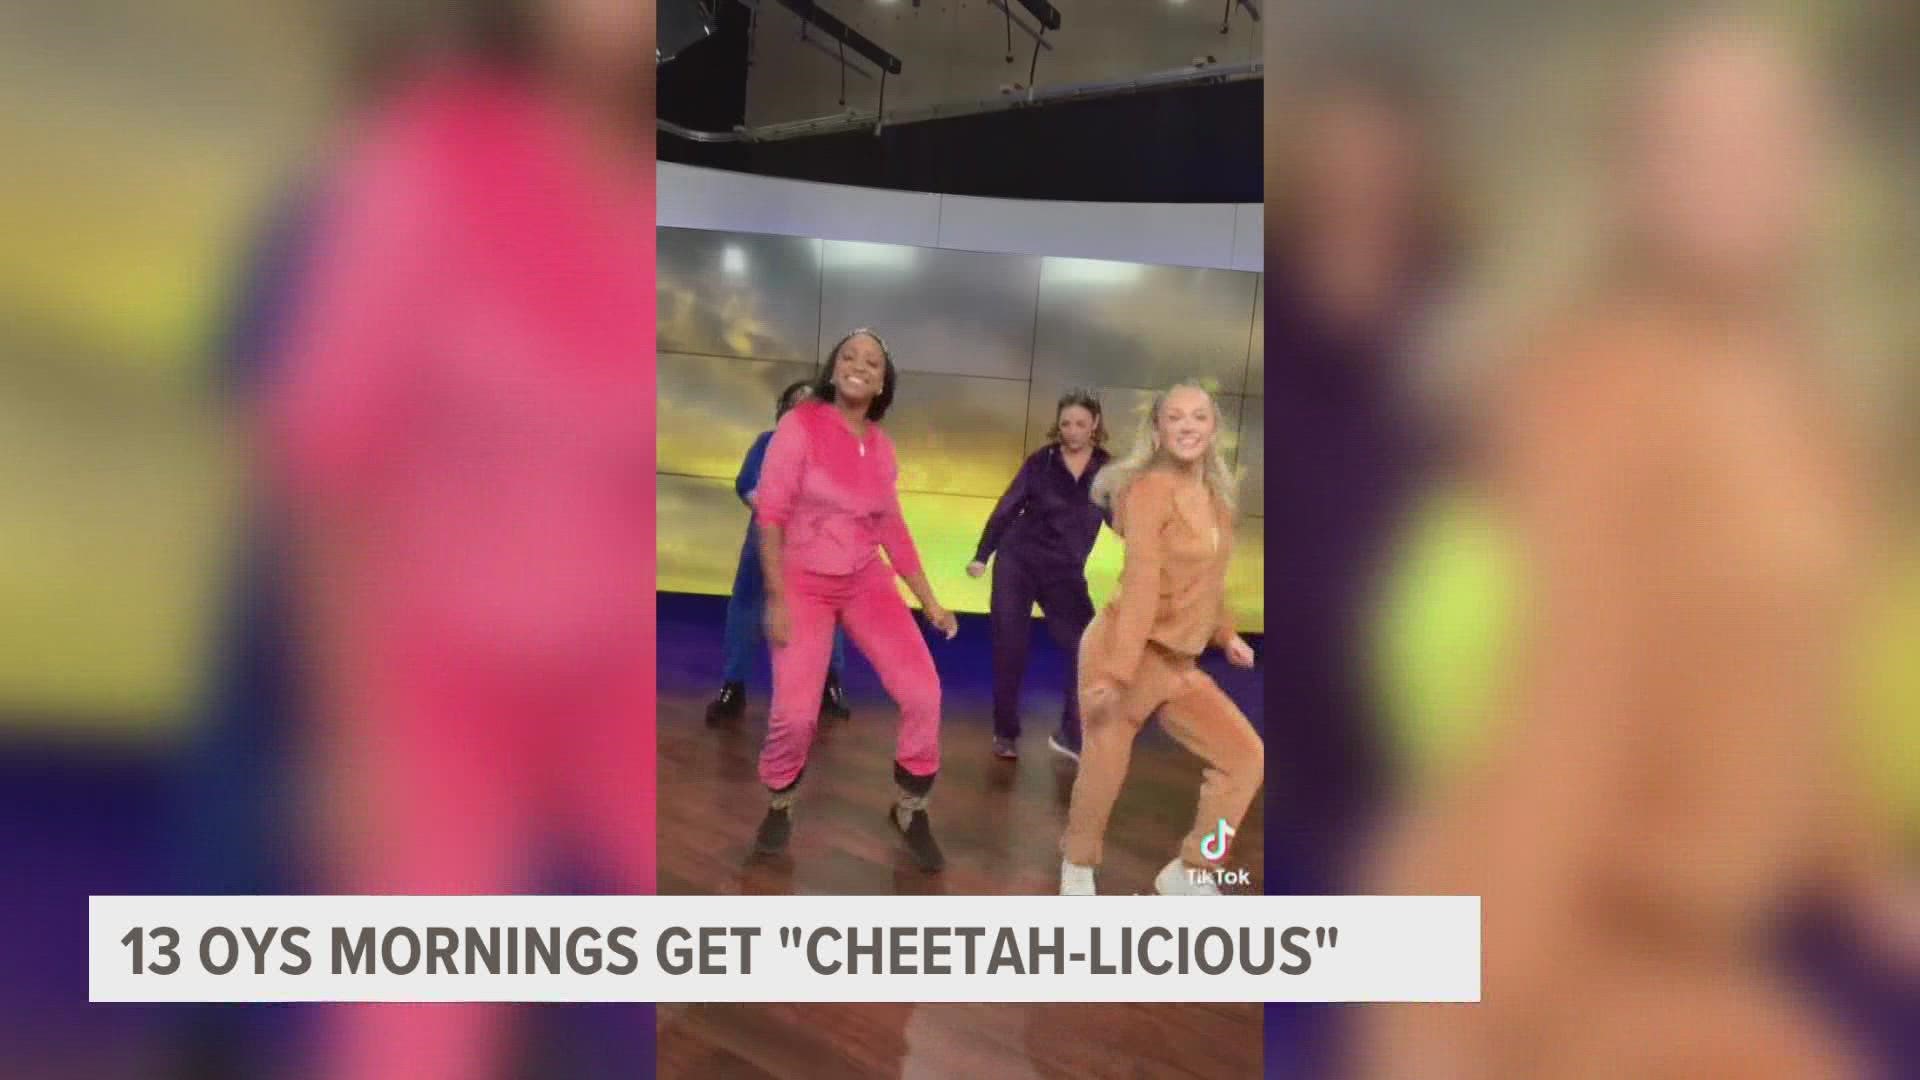 Check out this Cheetah-licious Halloween group costume!